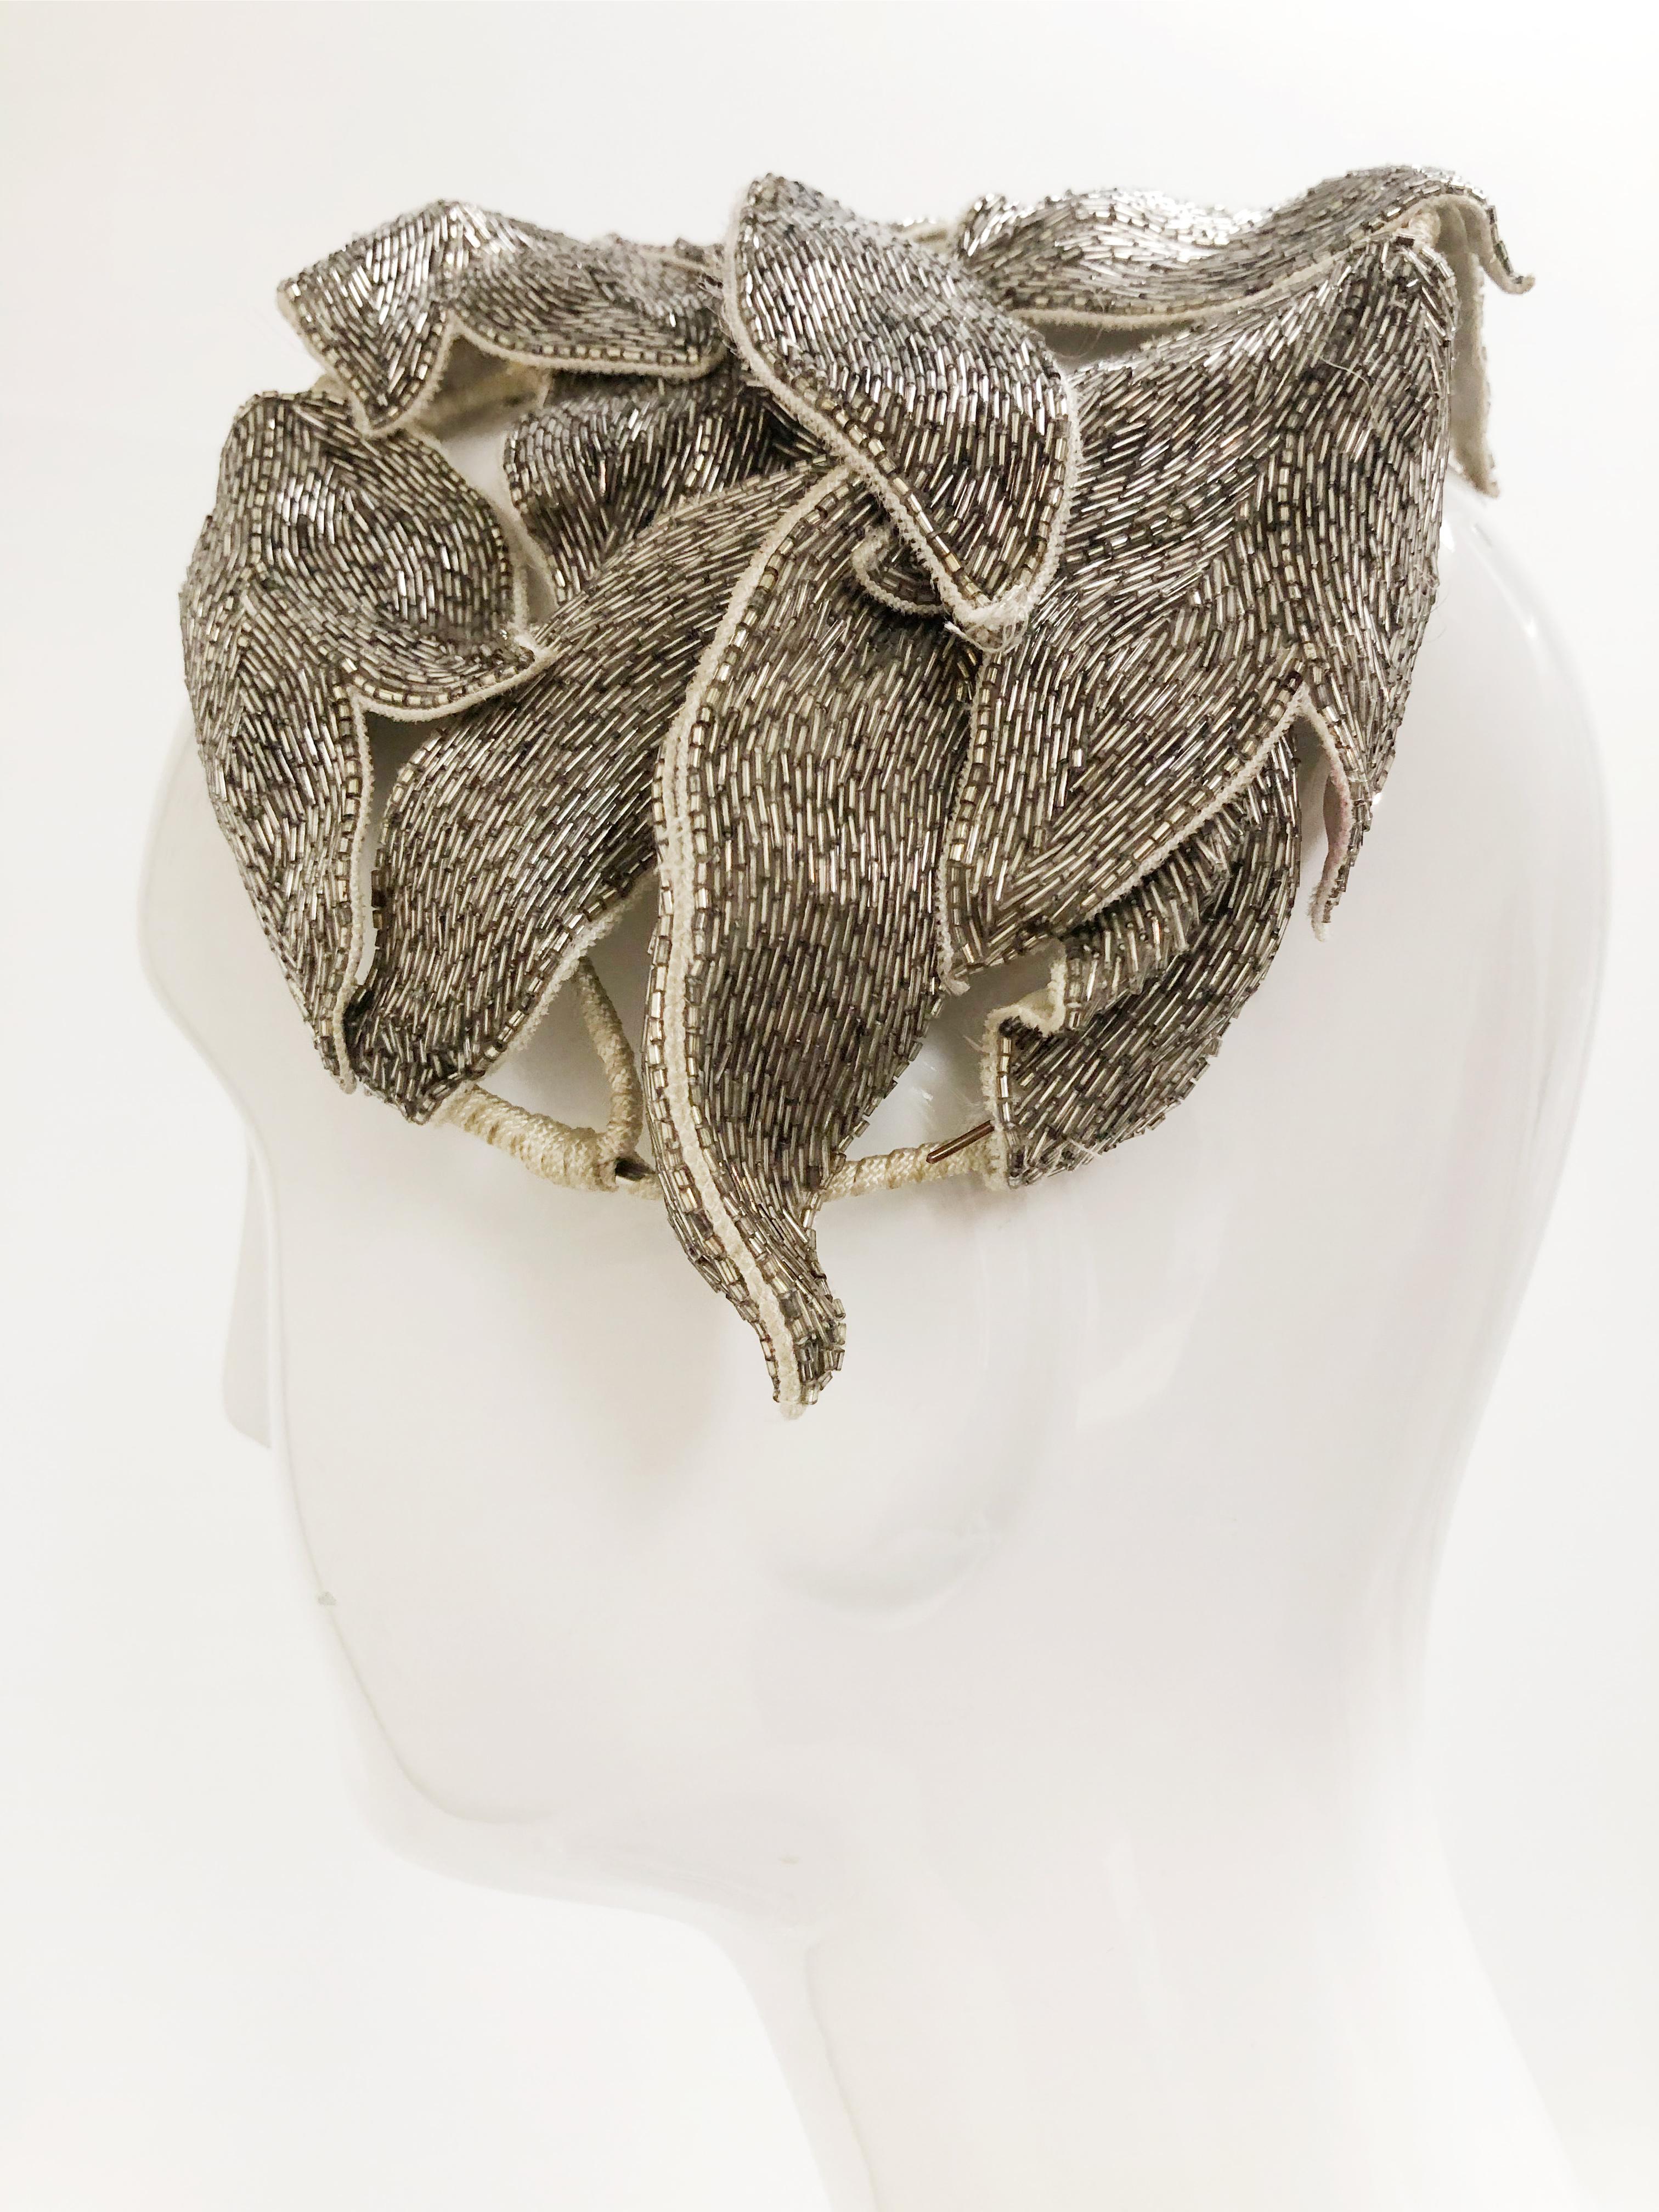 1950s restyled Maggie Norris close-fitting silver bugle bead covered leaf hat. Nicely made with covered wires for structure under applique leaves. 